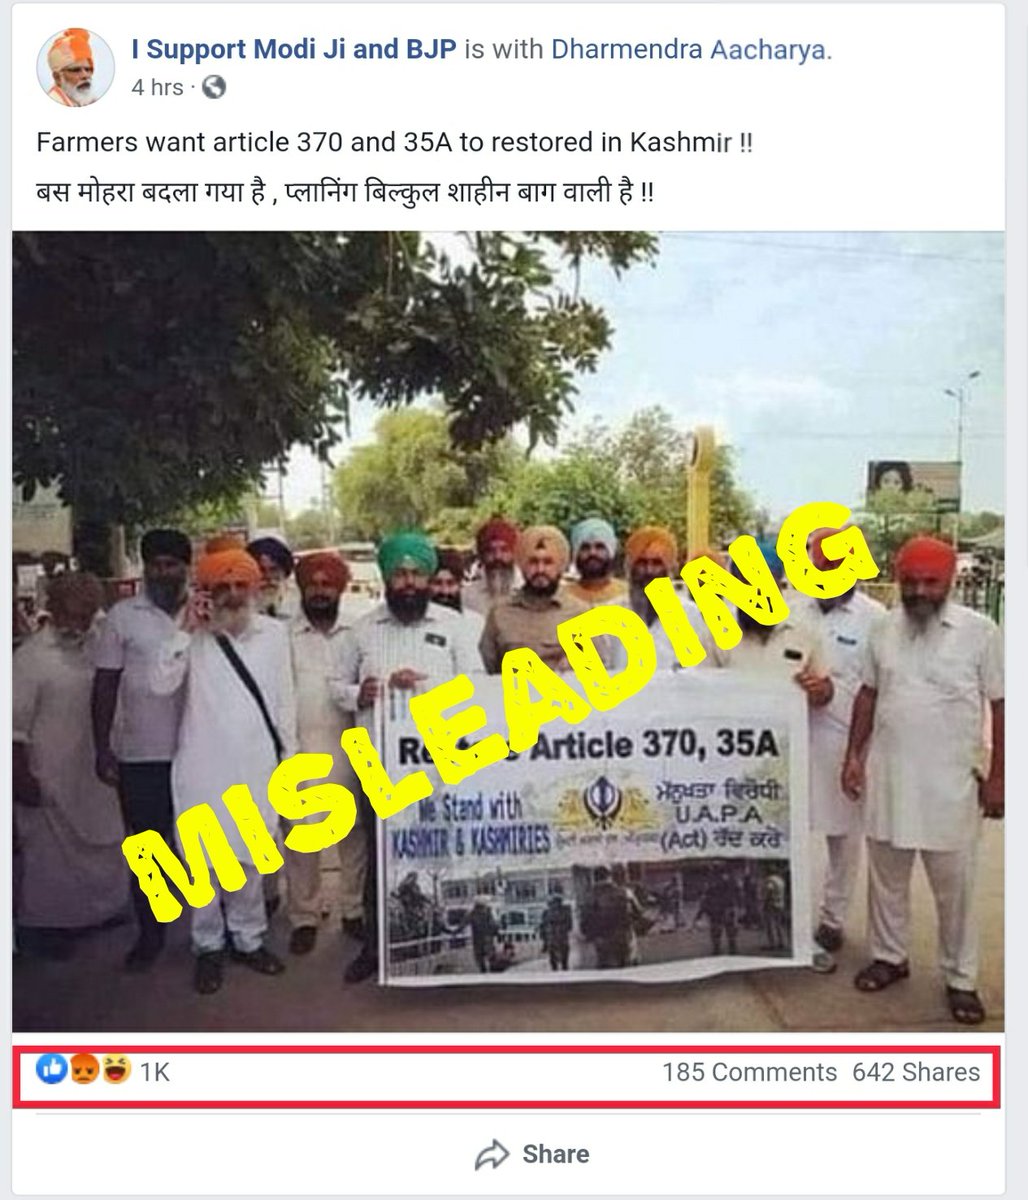 A 2019 photo of Shiromani Akali Dal Amritsar protesting the revocation of Articles 370 and 35A from J&K has been falsely shared as farmers raising the Kashmir issue during ongoing protests.  #AltNewsFactCheck 8/n https://www.altnews.in/old-unrelated-photo-shared-as-farmers-protesting-revocation-of-article-370-and-uapa/?utm_source=website&utm_medium=social-media&utm_campaign=newpost